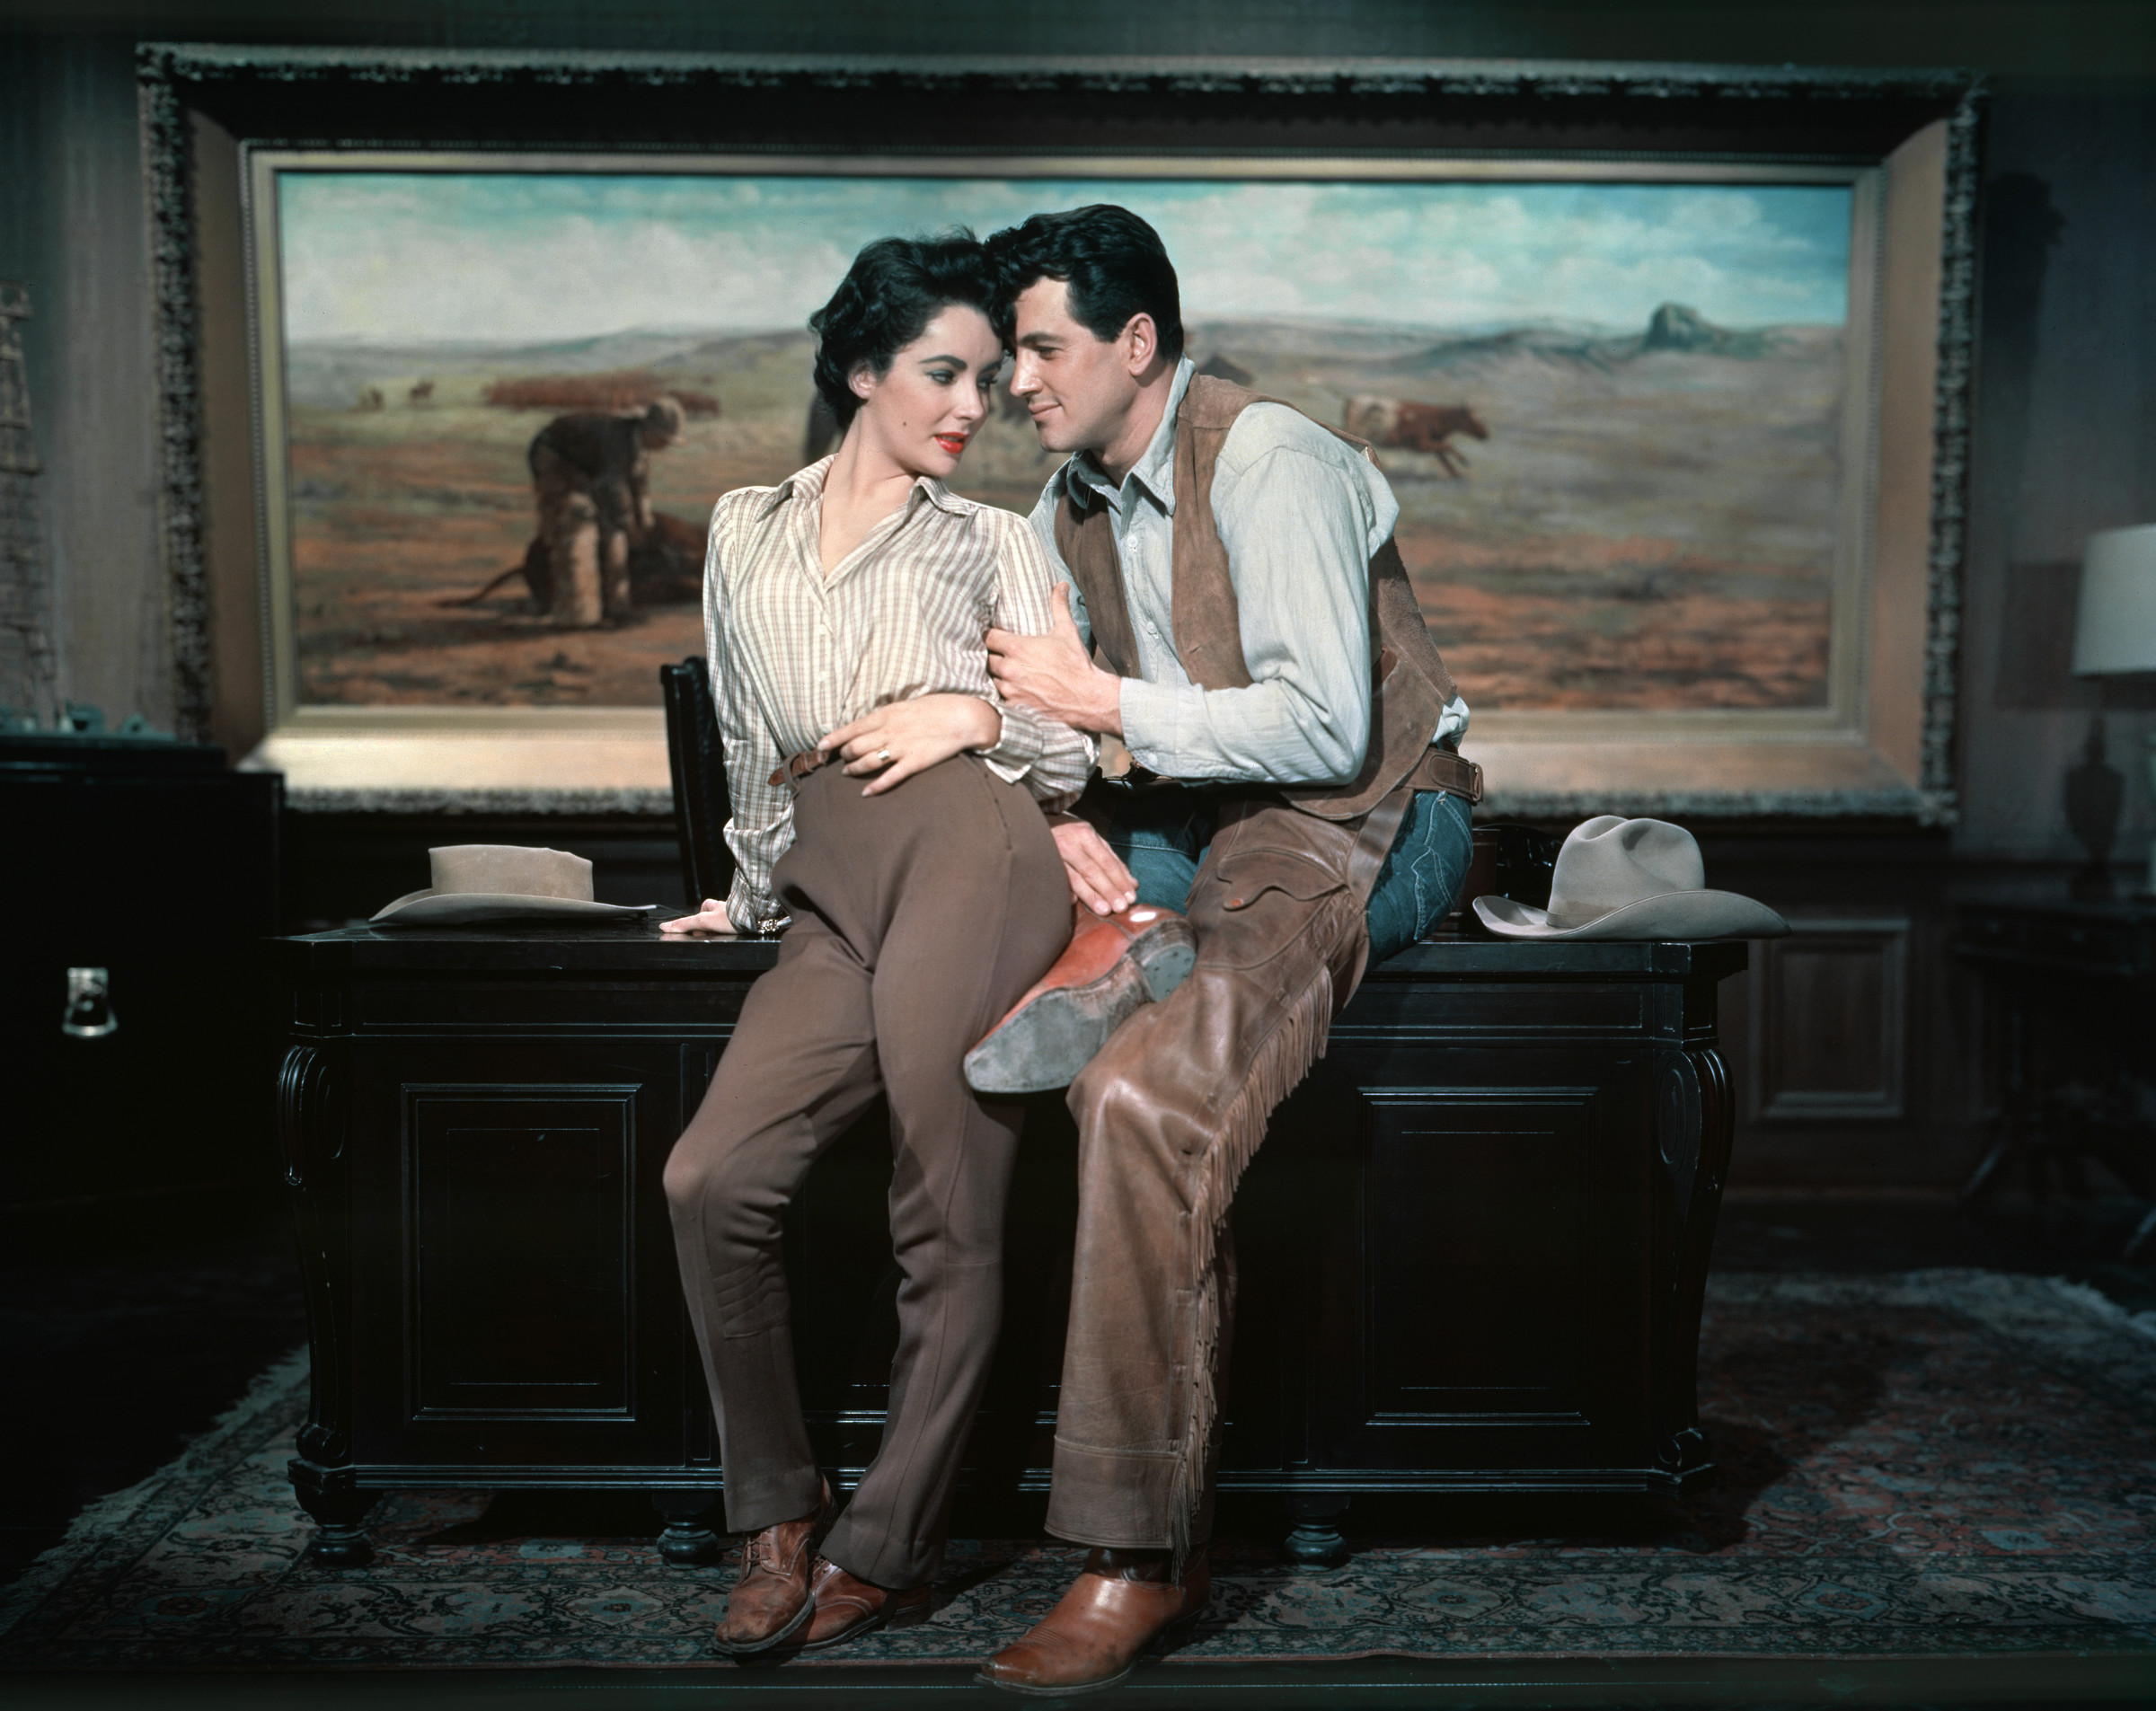 1957 --- Elizabeth Taylor and Rock Hudson on the set of "Giant". --- Image by © Sunset Boulevard/Corbis